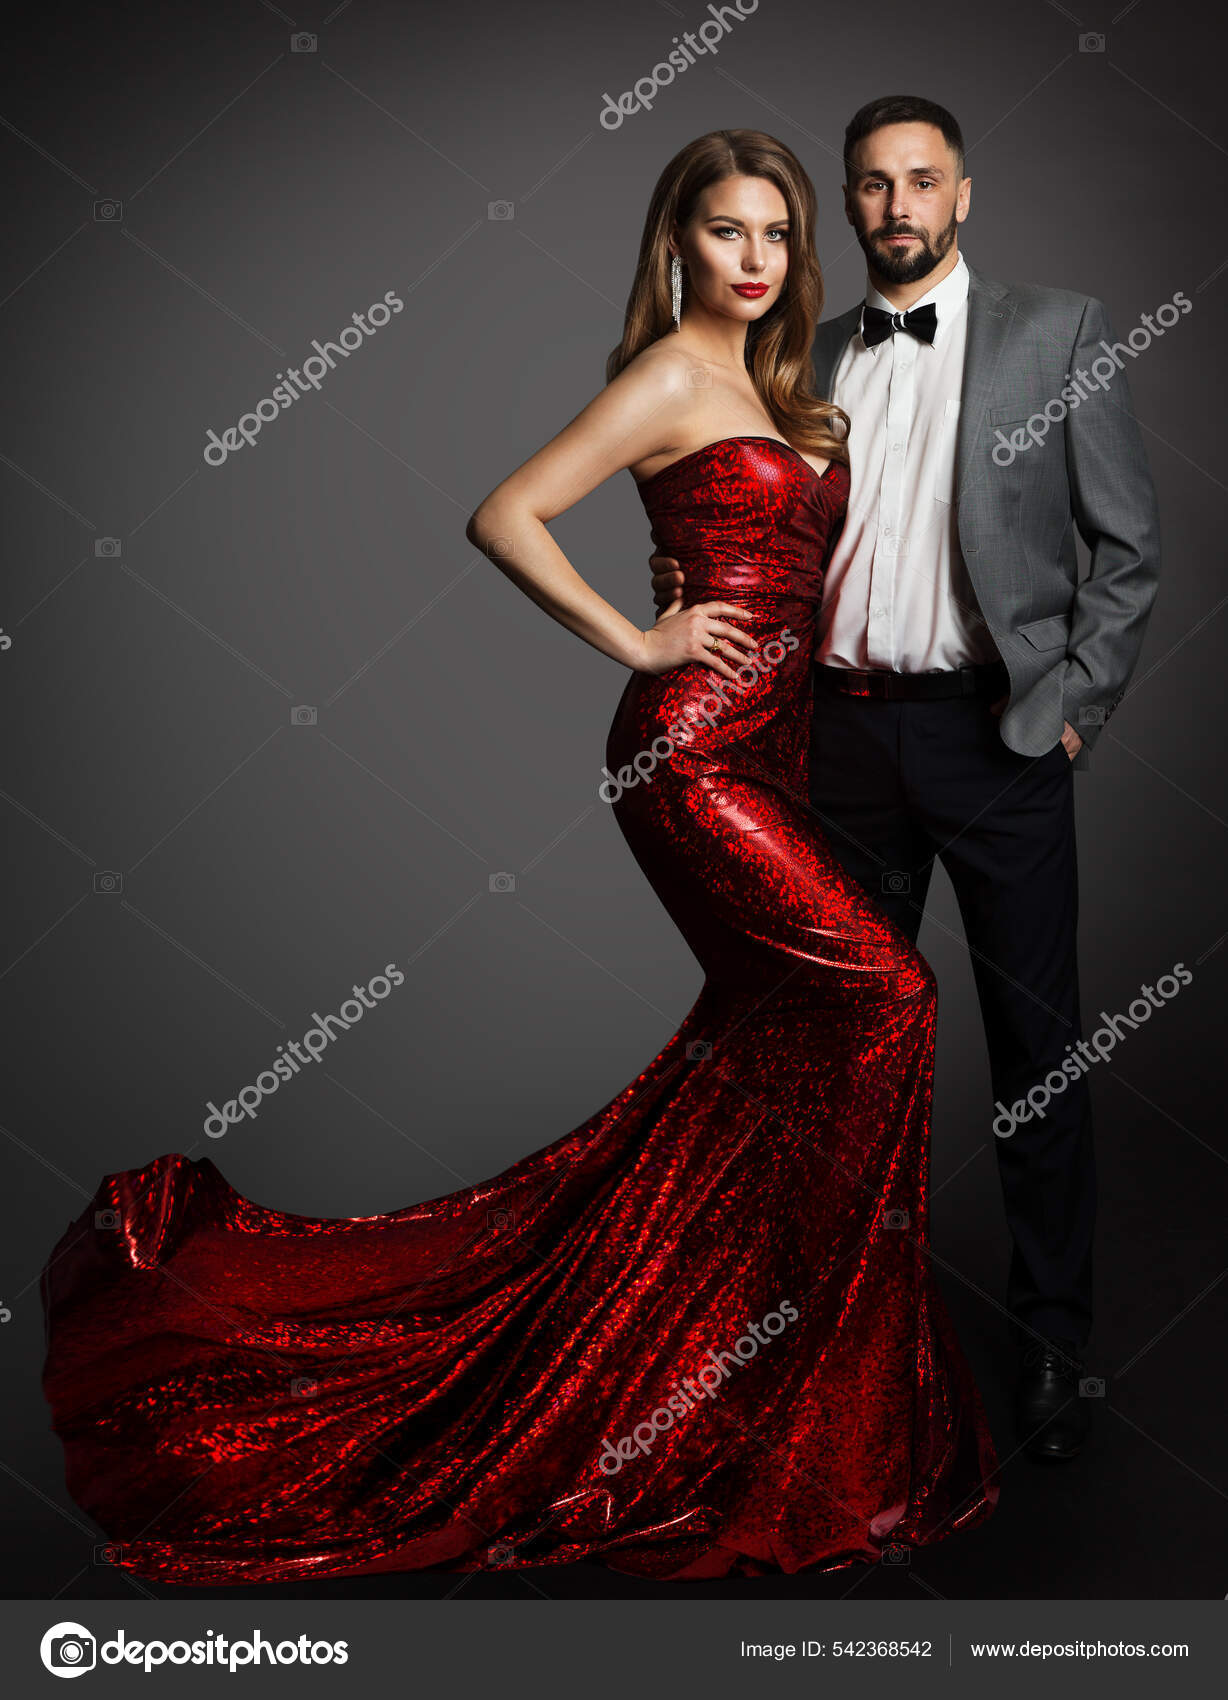 Couple suit gown Stock Photos, Royalty Free Couple suit gown Images |  Depositphotos